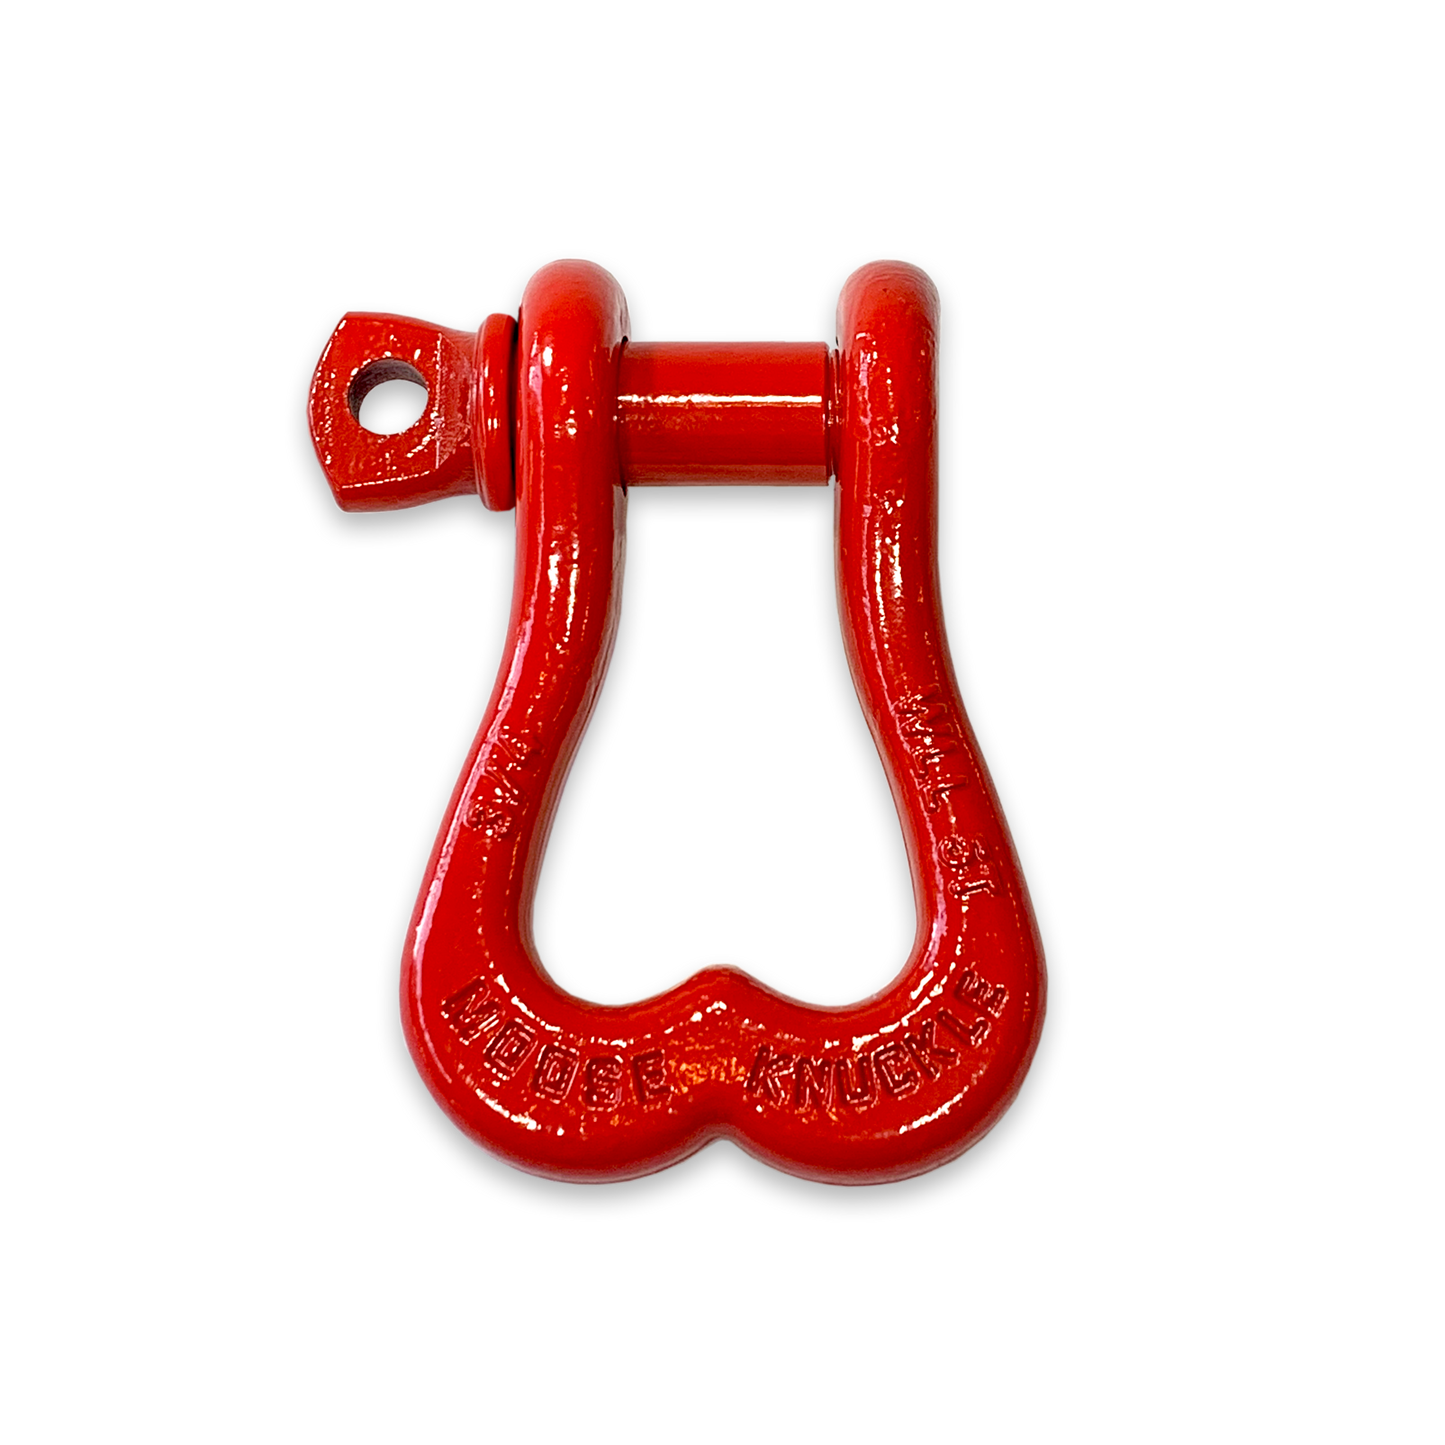 Moose Knuckle XL Flame Red D-Ring 3/4" Shackle for Towing Off-Road Jeep, Tacoma, 4-Runner, 4x4 Truck and SxS Vehicle Recovery